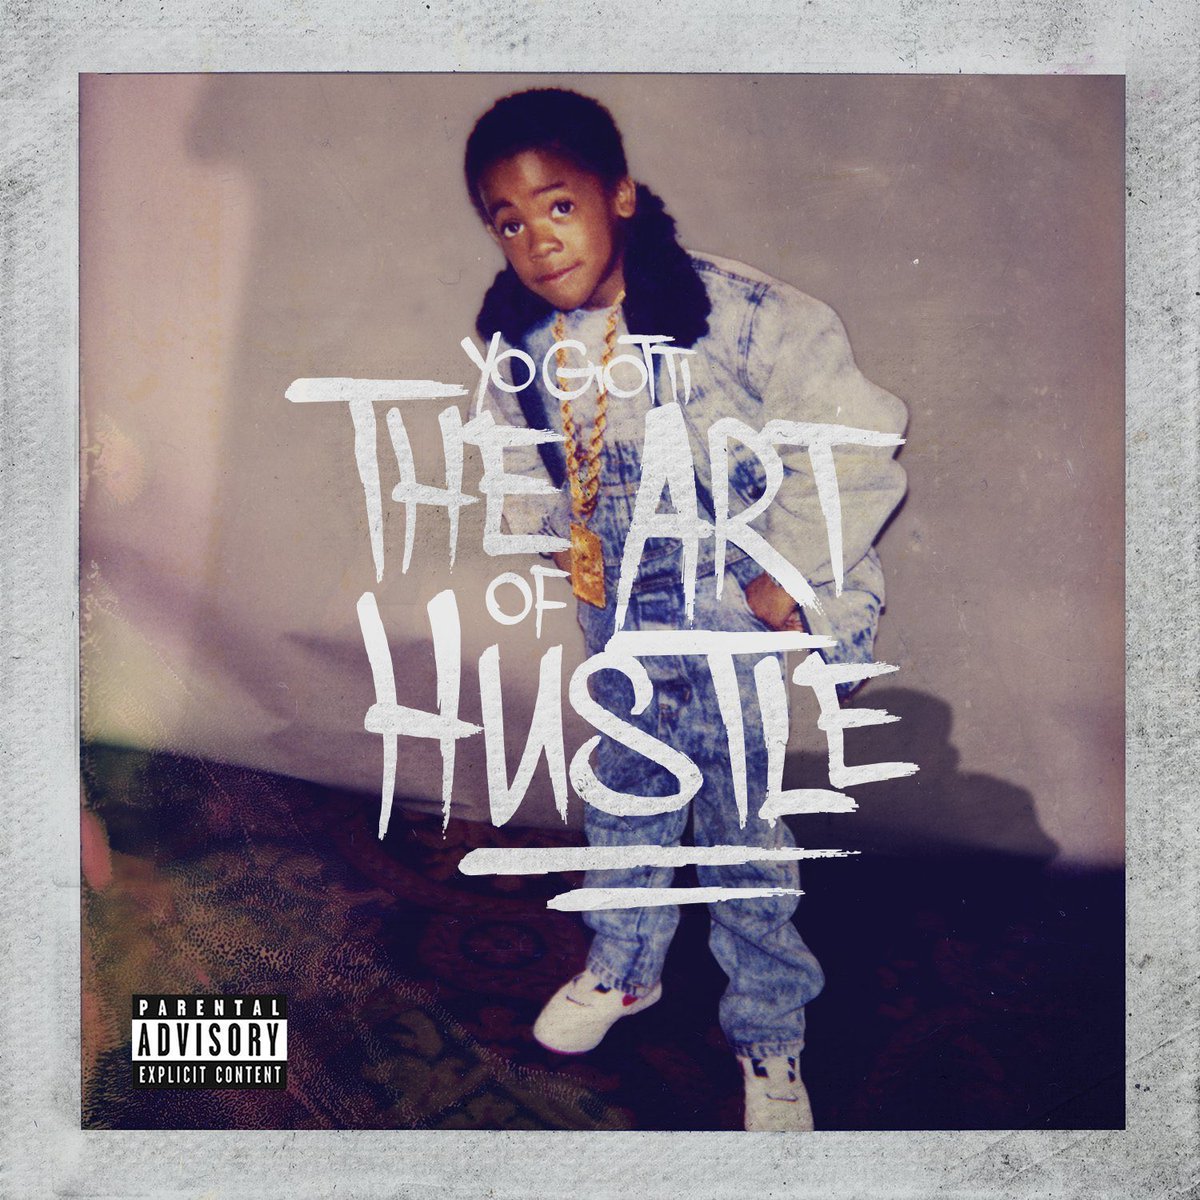 February 19, 2016 @YoGotti released The Art of Hustle 

Some Production Includes @DrummaBoyFRESH @BENBILLIONS @MrBangladesh @Timbaland and more 

Some Features Include @PUSHA_T @1future @E40 @kmichelle @2chainz and more